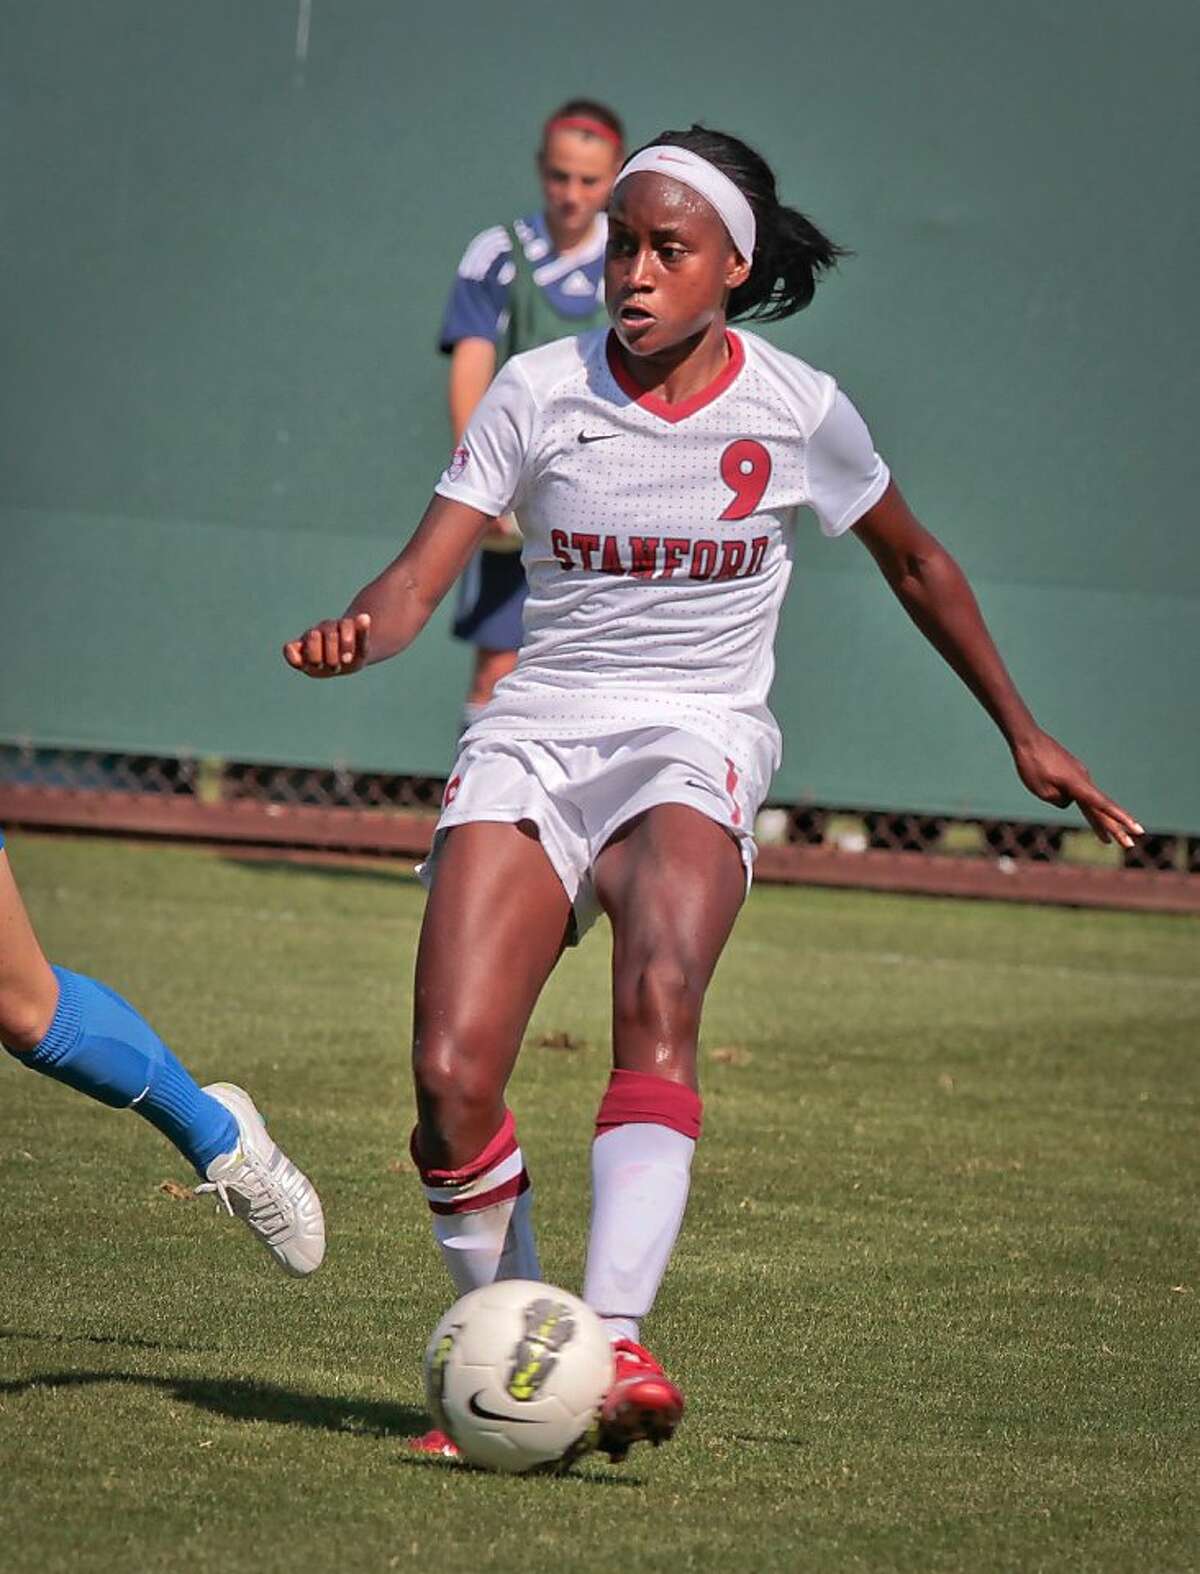 Chioma Ubogagu of Stanford drives towards the goal against UCLA during women's soccer at Cagan Stadium at Stanford, Calif., on Sunday, October 9, 2011.